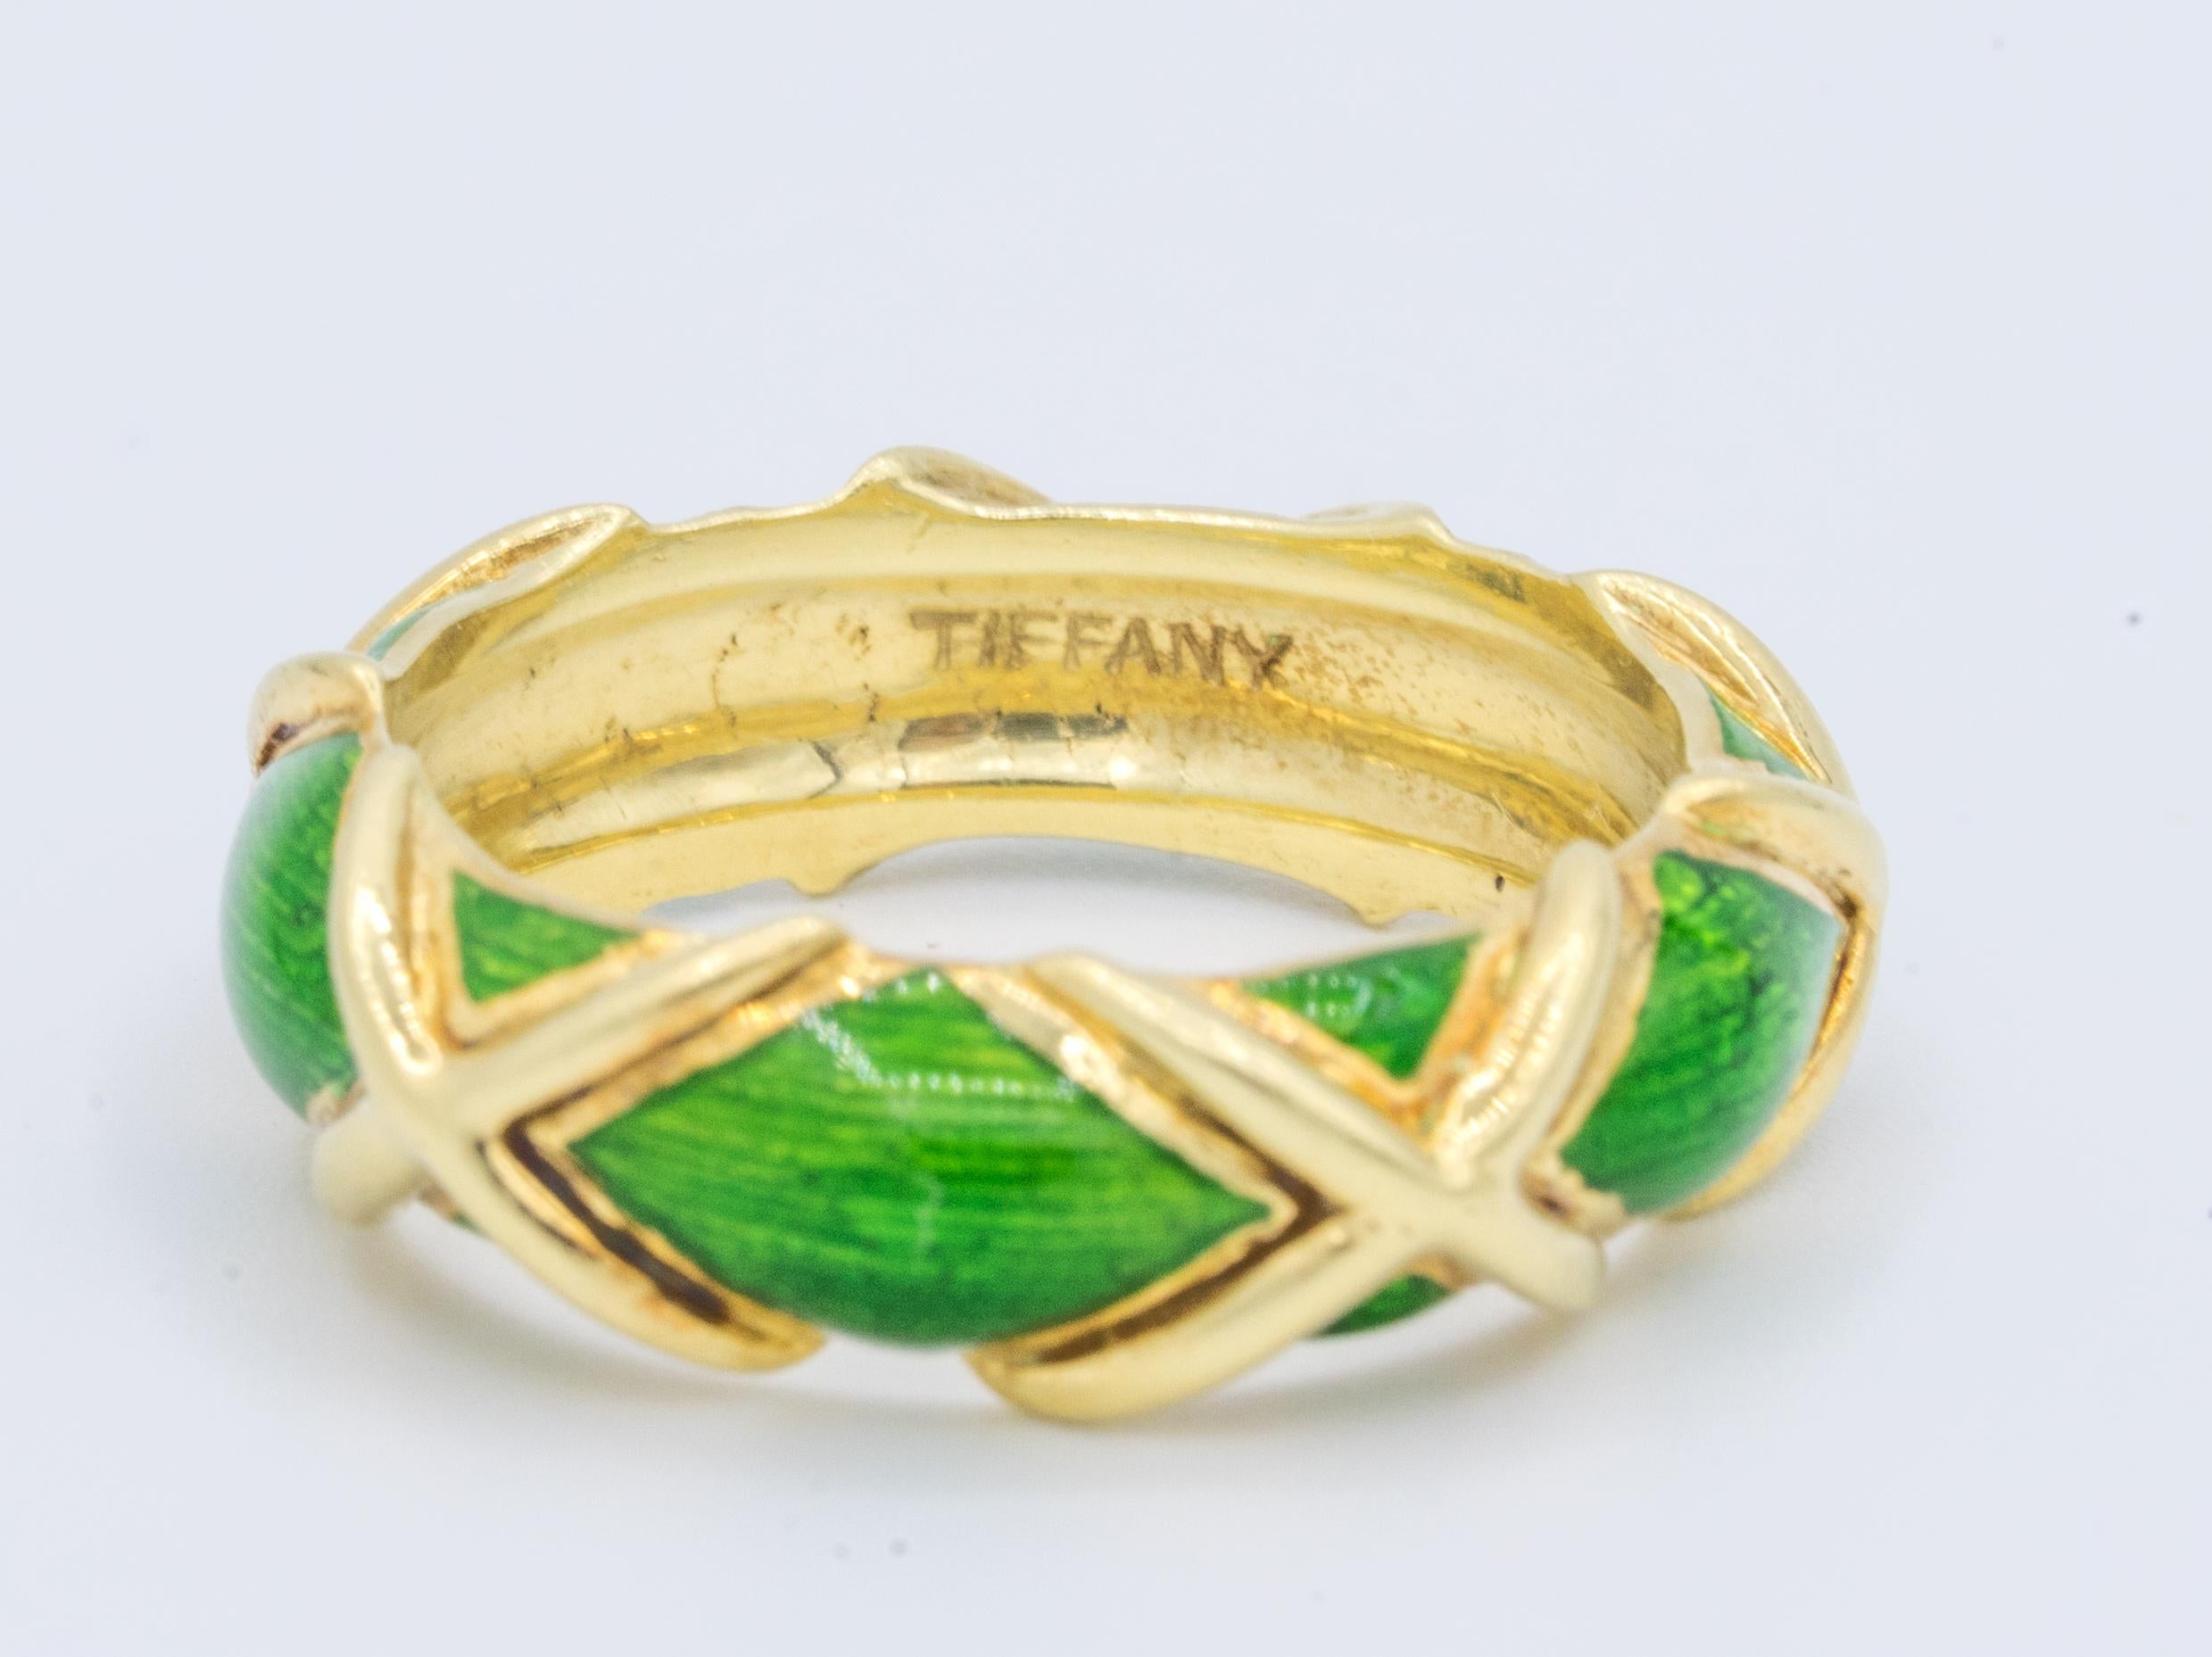 Tiffany & Co. 18k Gold 'X' and Green Enamel design Circa 1960's

Brand: Tiffany & Co.
Ring Size 6
Width: 6.5 mm
Signed: TIFFANY 
Stamped: 18K

Circa 1960's
Condition: Pre-Owned, Minor gold discoloration inner shank,  Enamel in excellent condition,